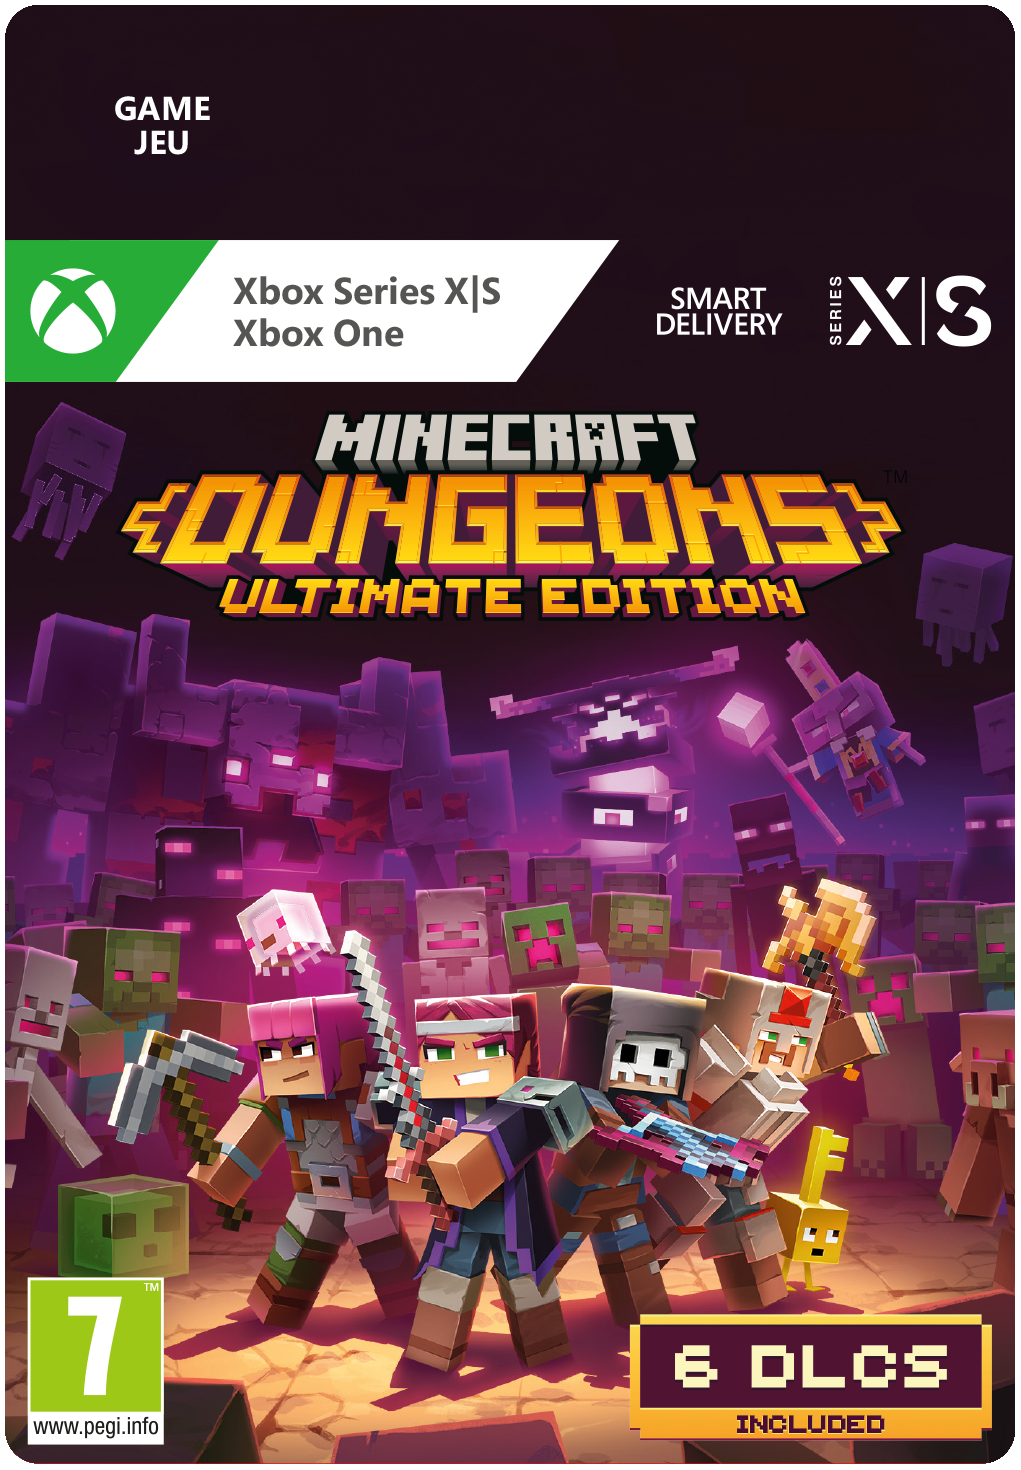 Minecraft Dungeons: Ultimate Edition - Xbox Series X|S/One - XboxLiveKaarten.nl